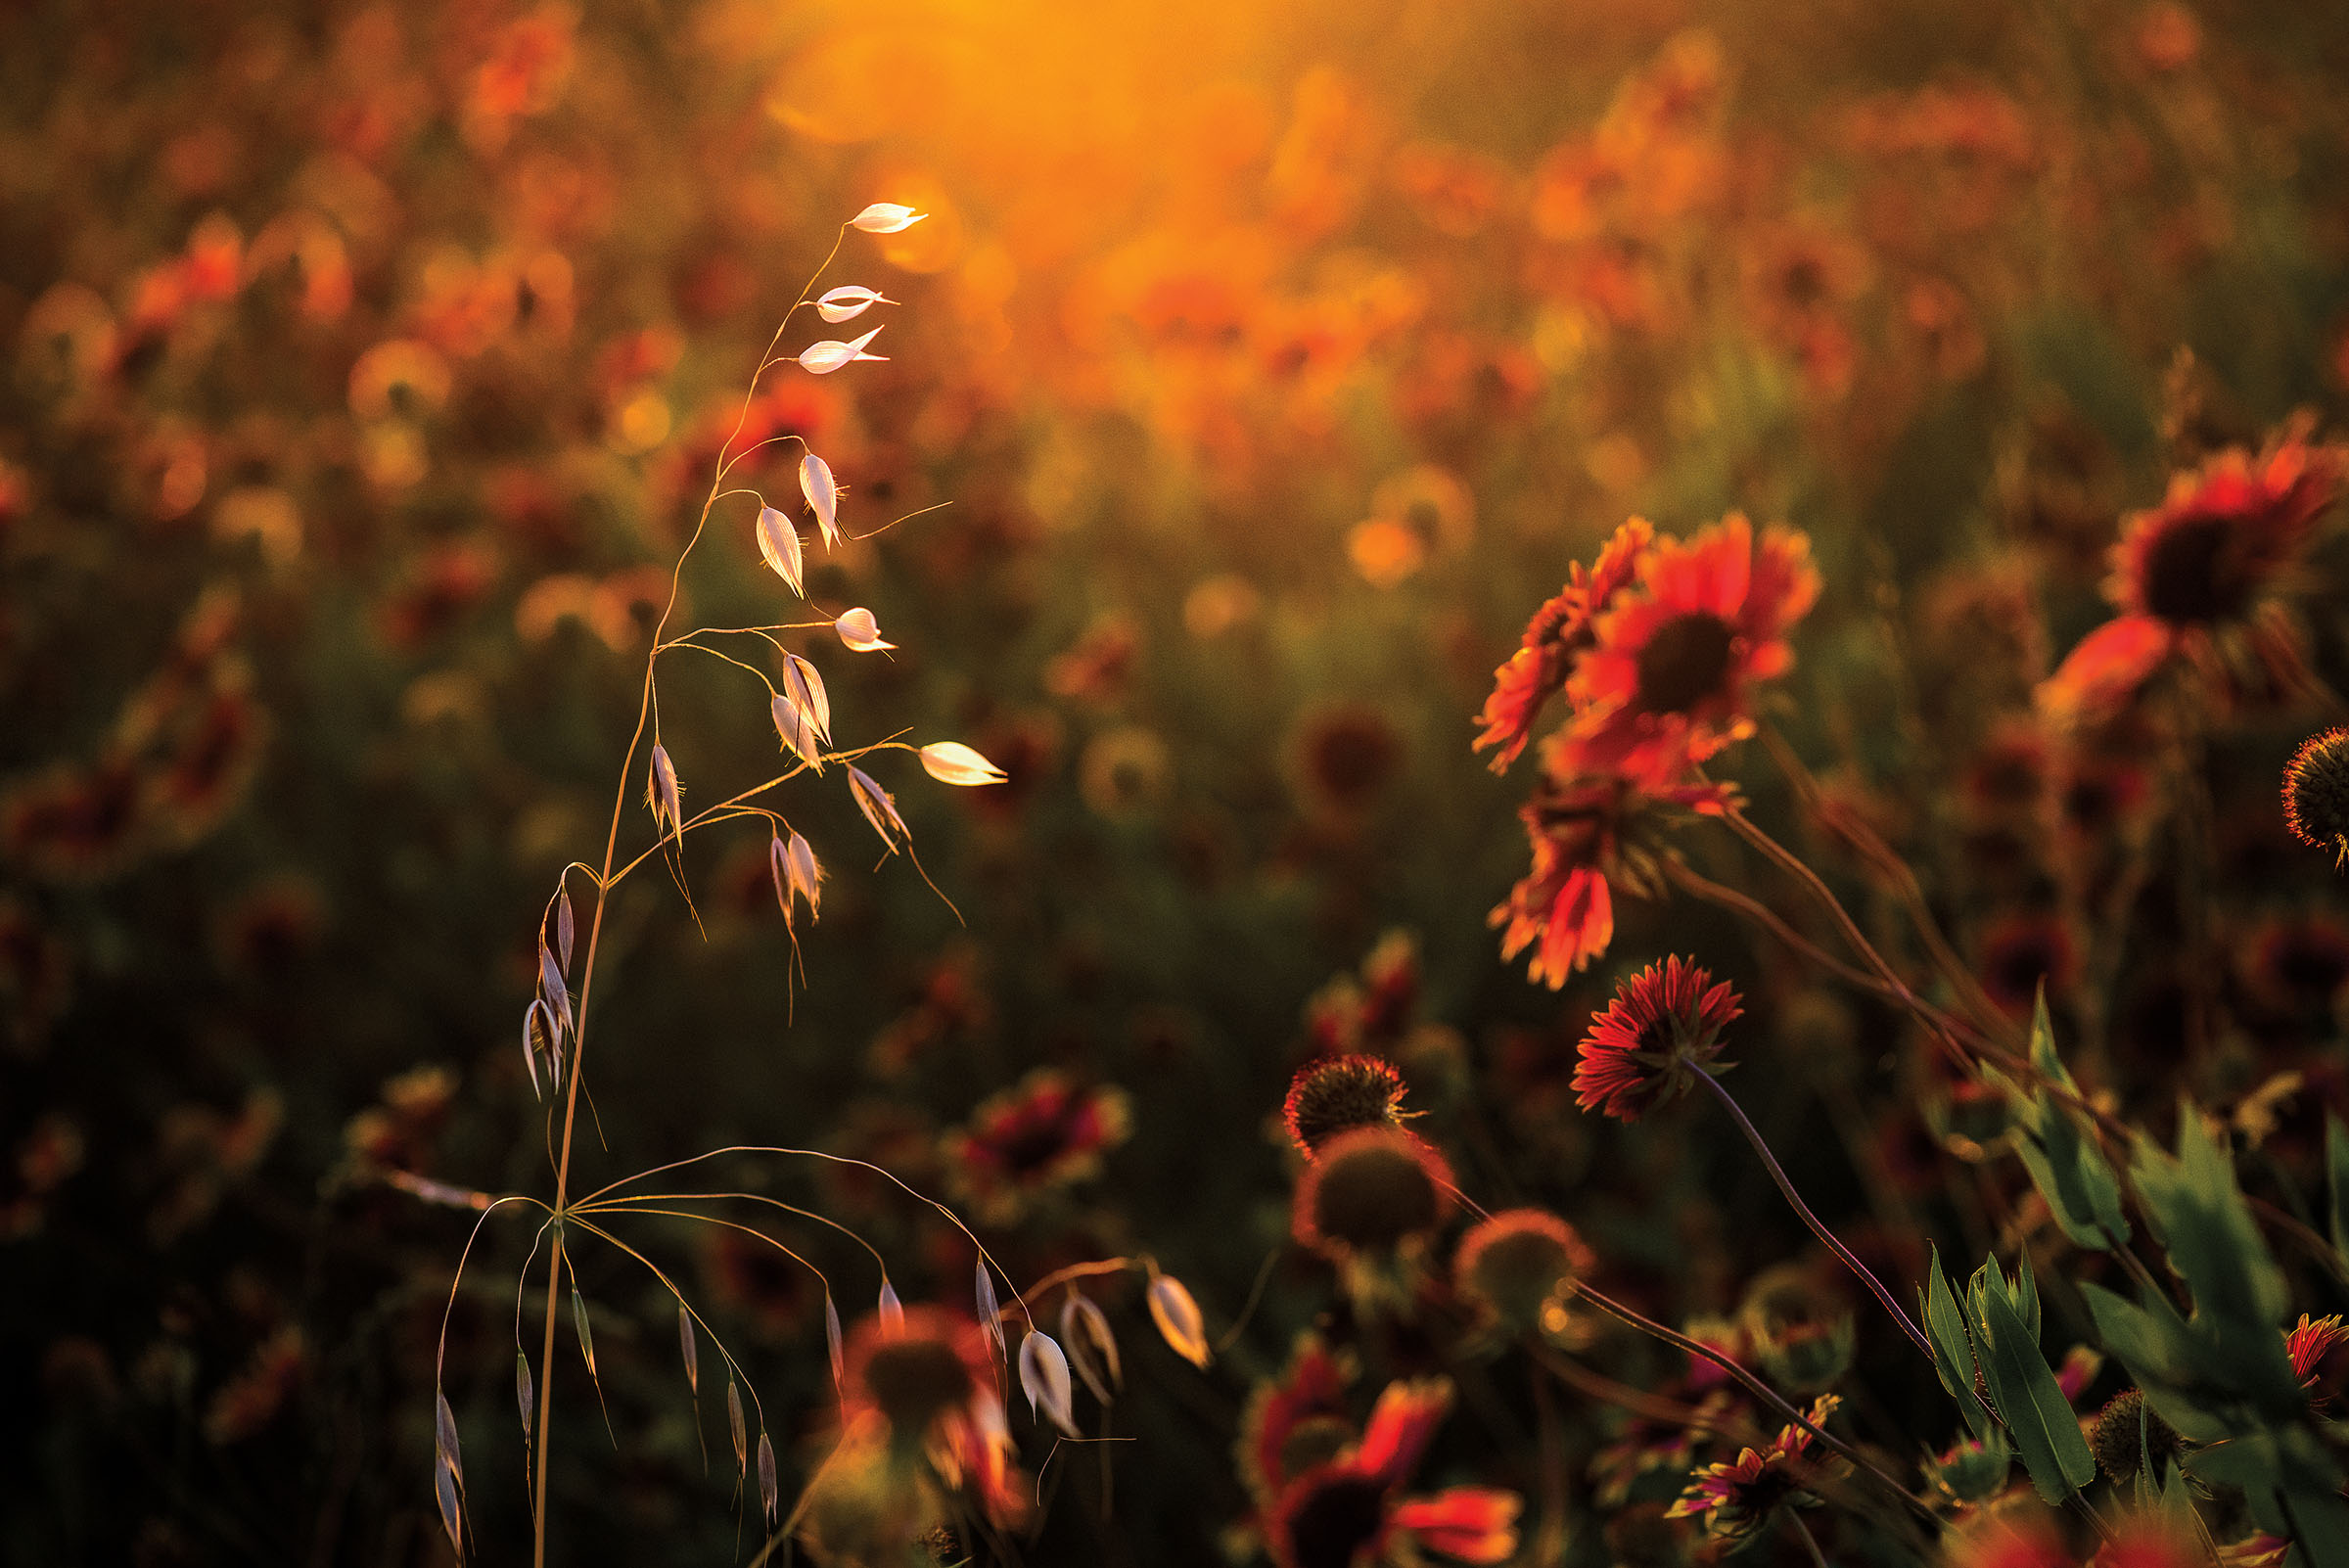 Golden sun touches the tops of bright red wildflowers